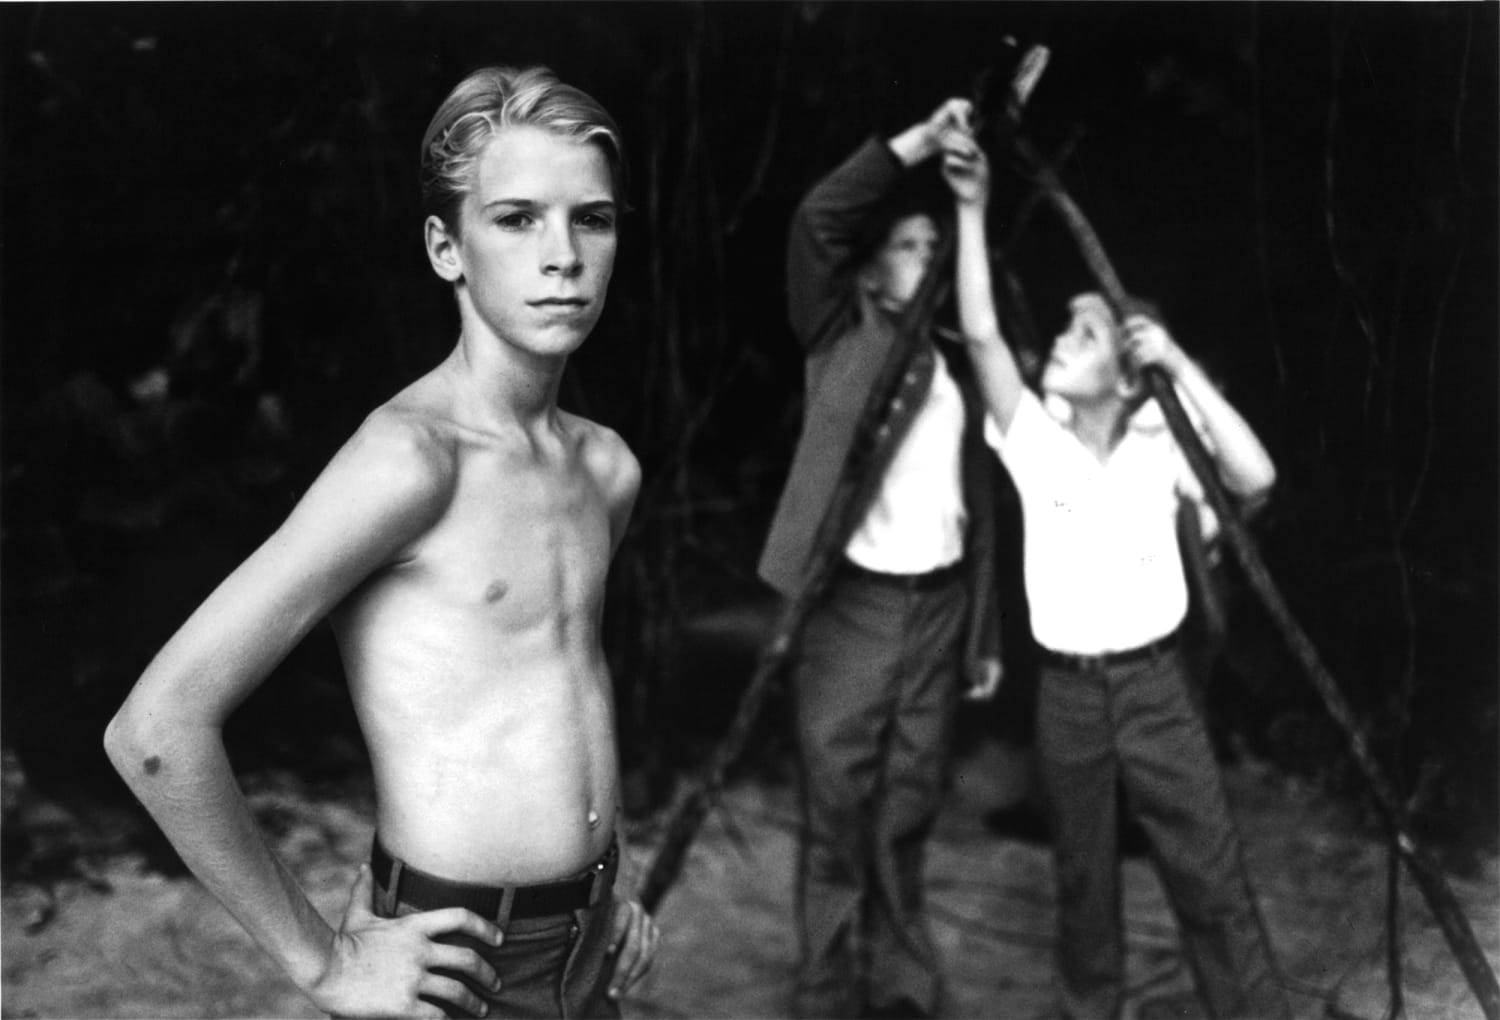 Plan For All Female Lord Of The Flies Remake Sparks Social Media Backlash